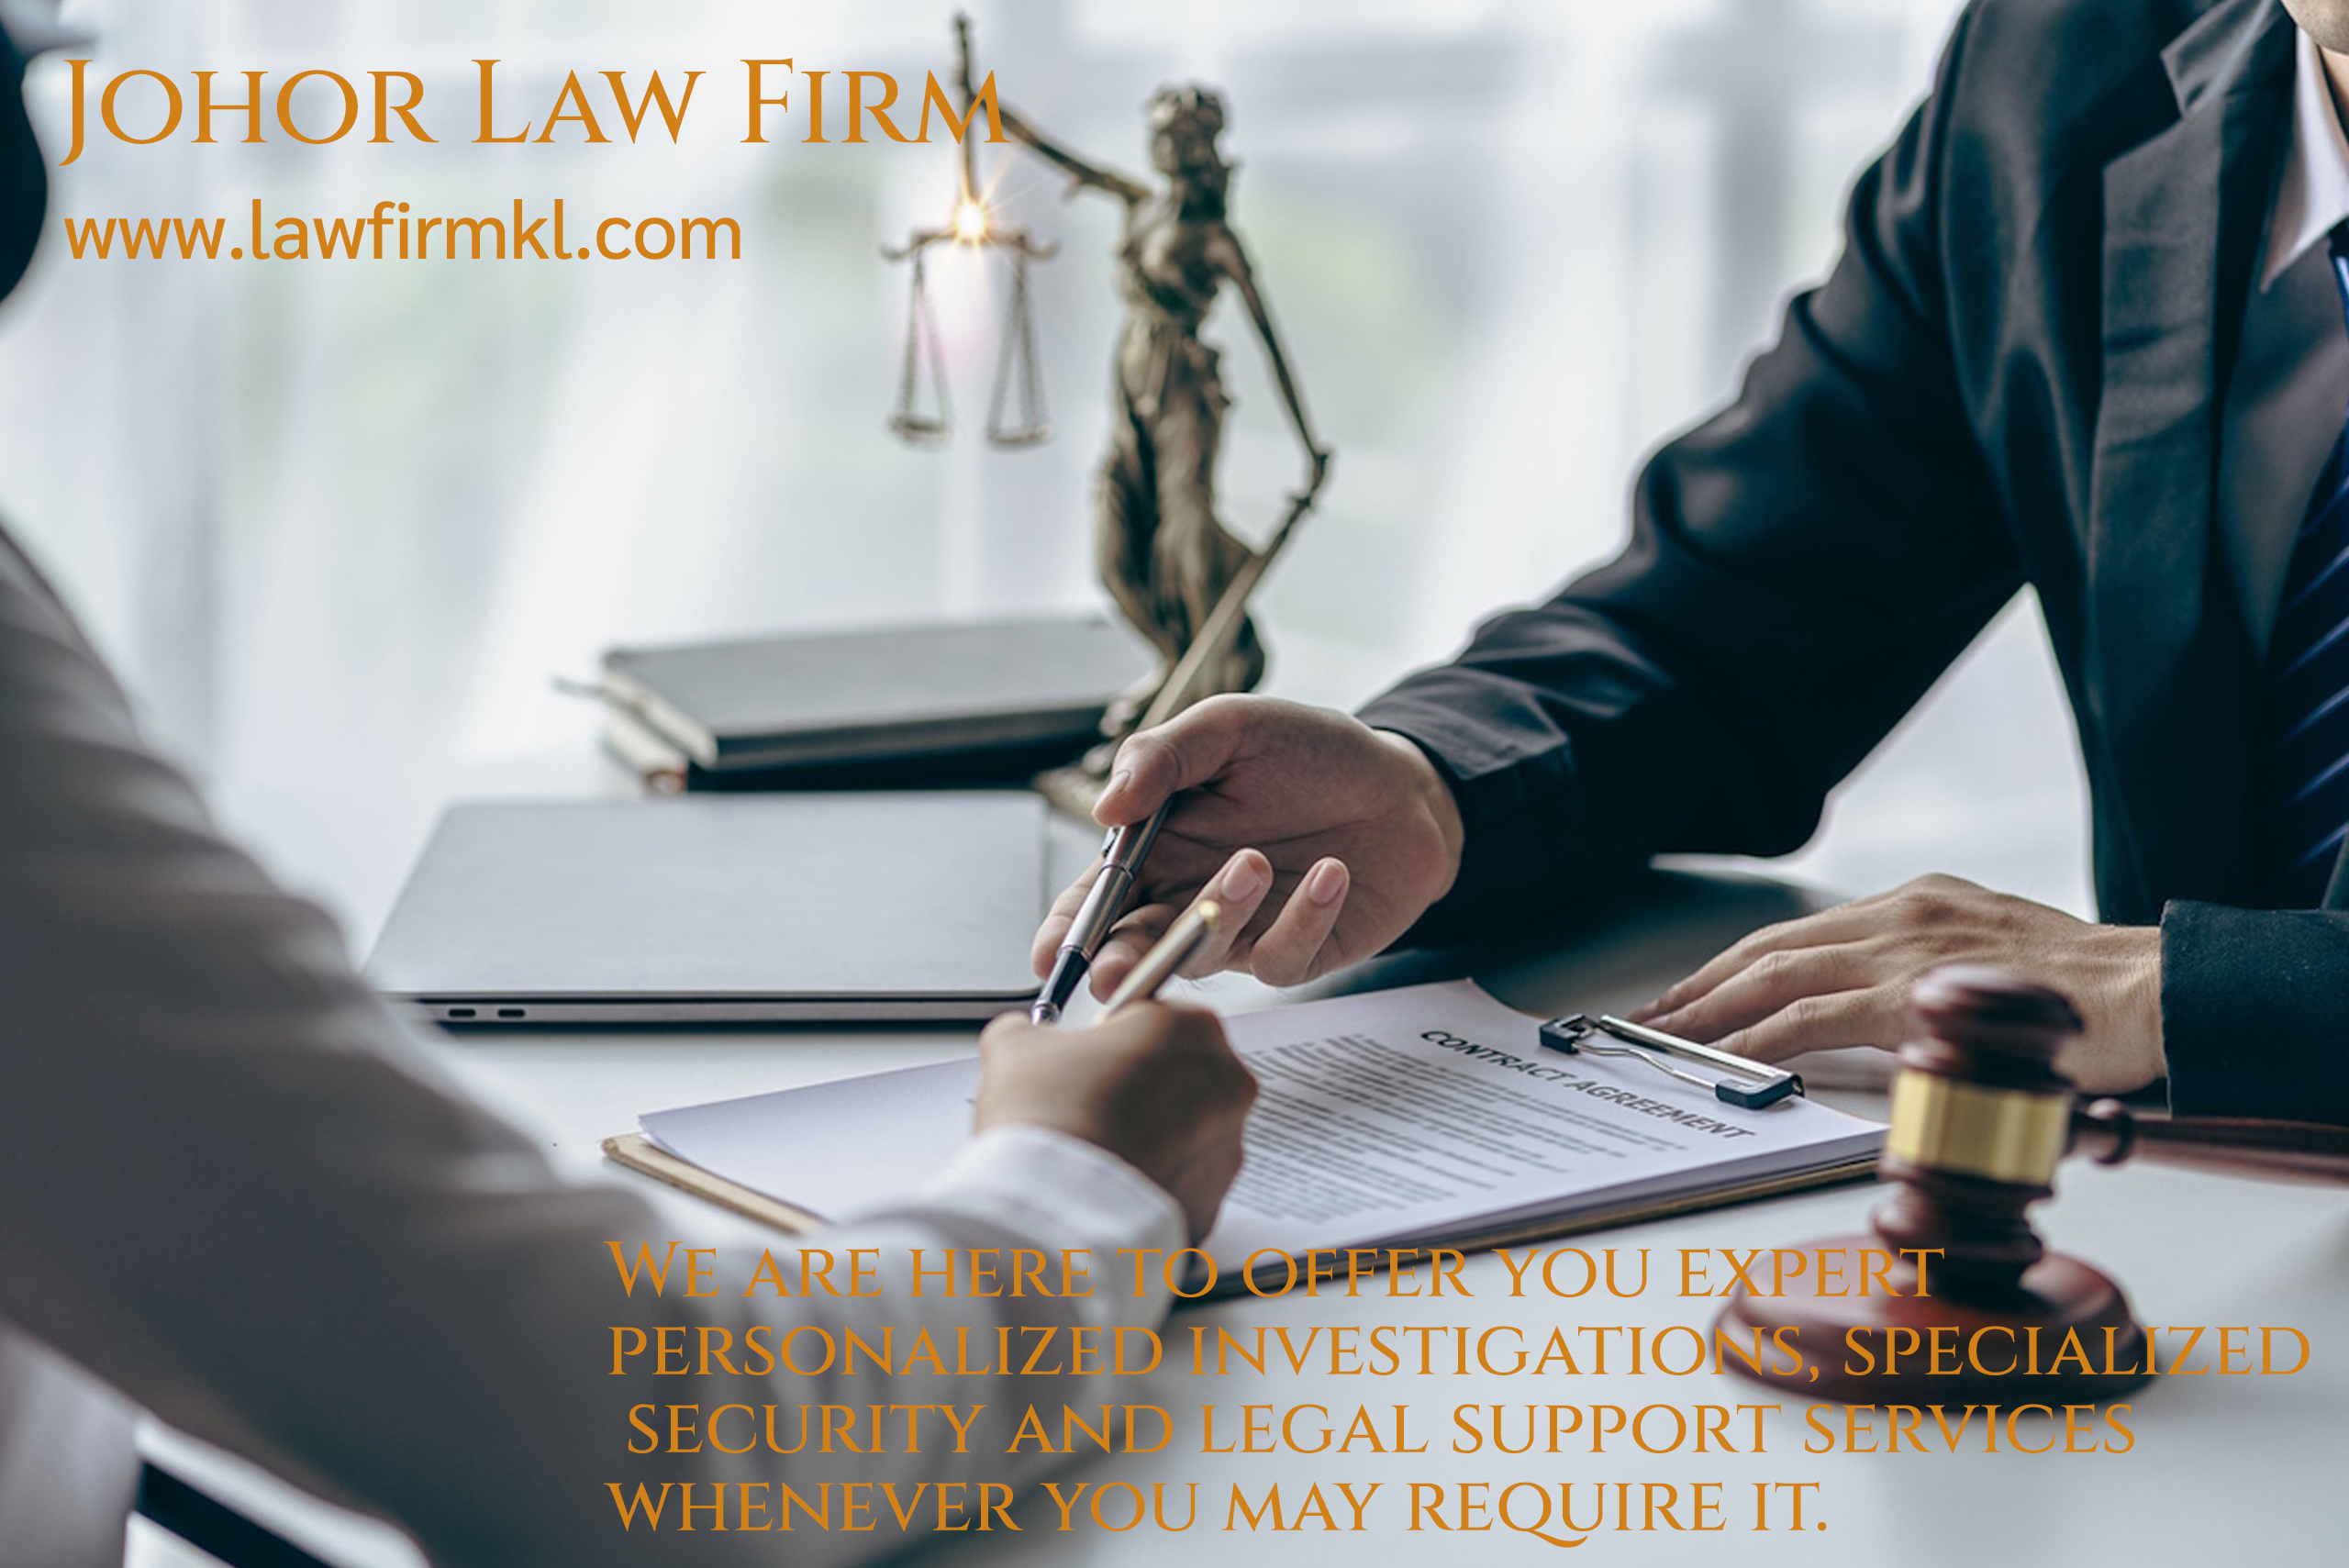 Johor Law Firm legal service